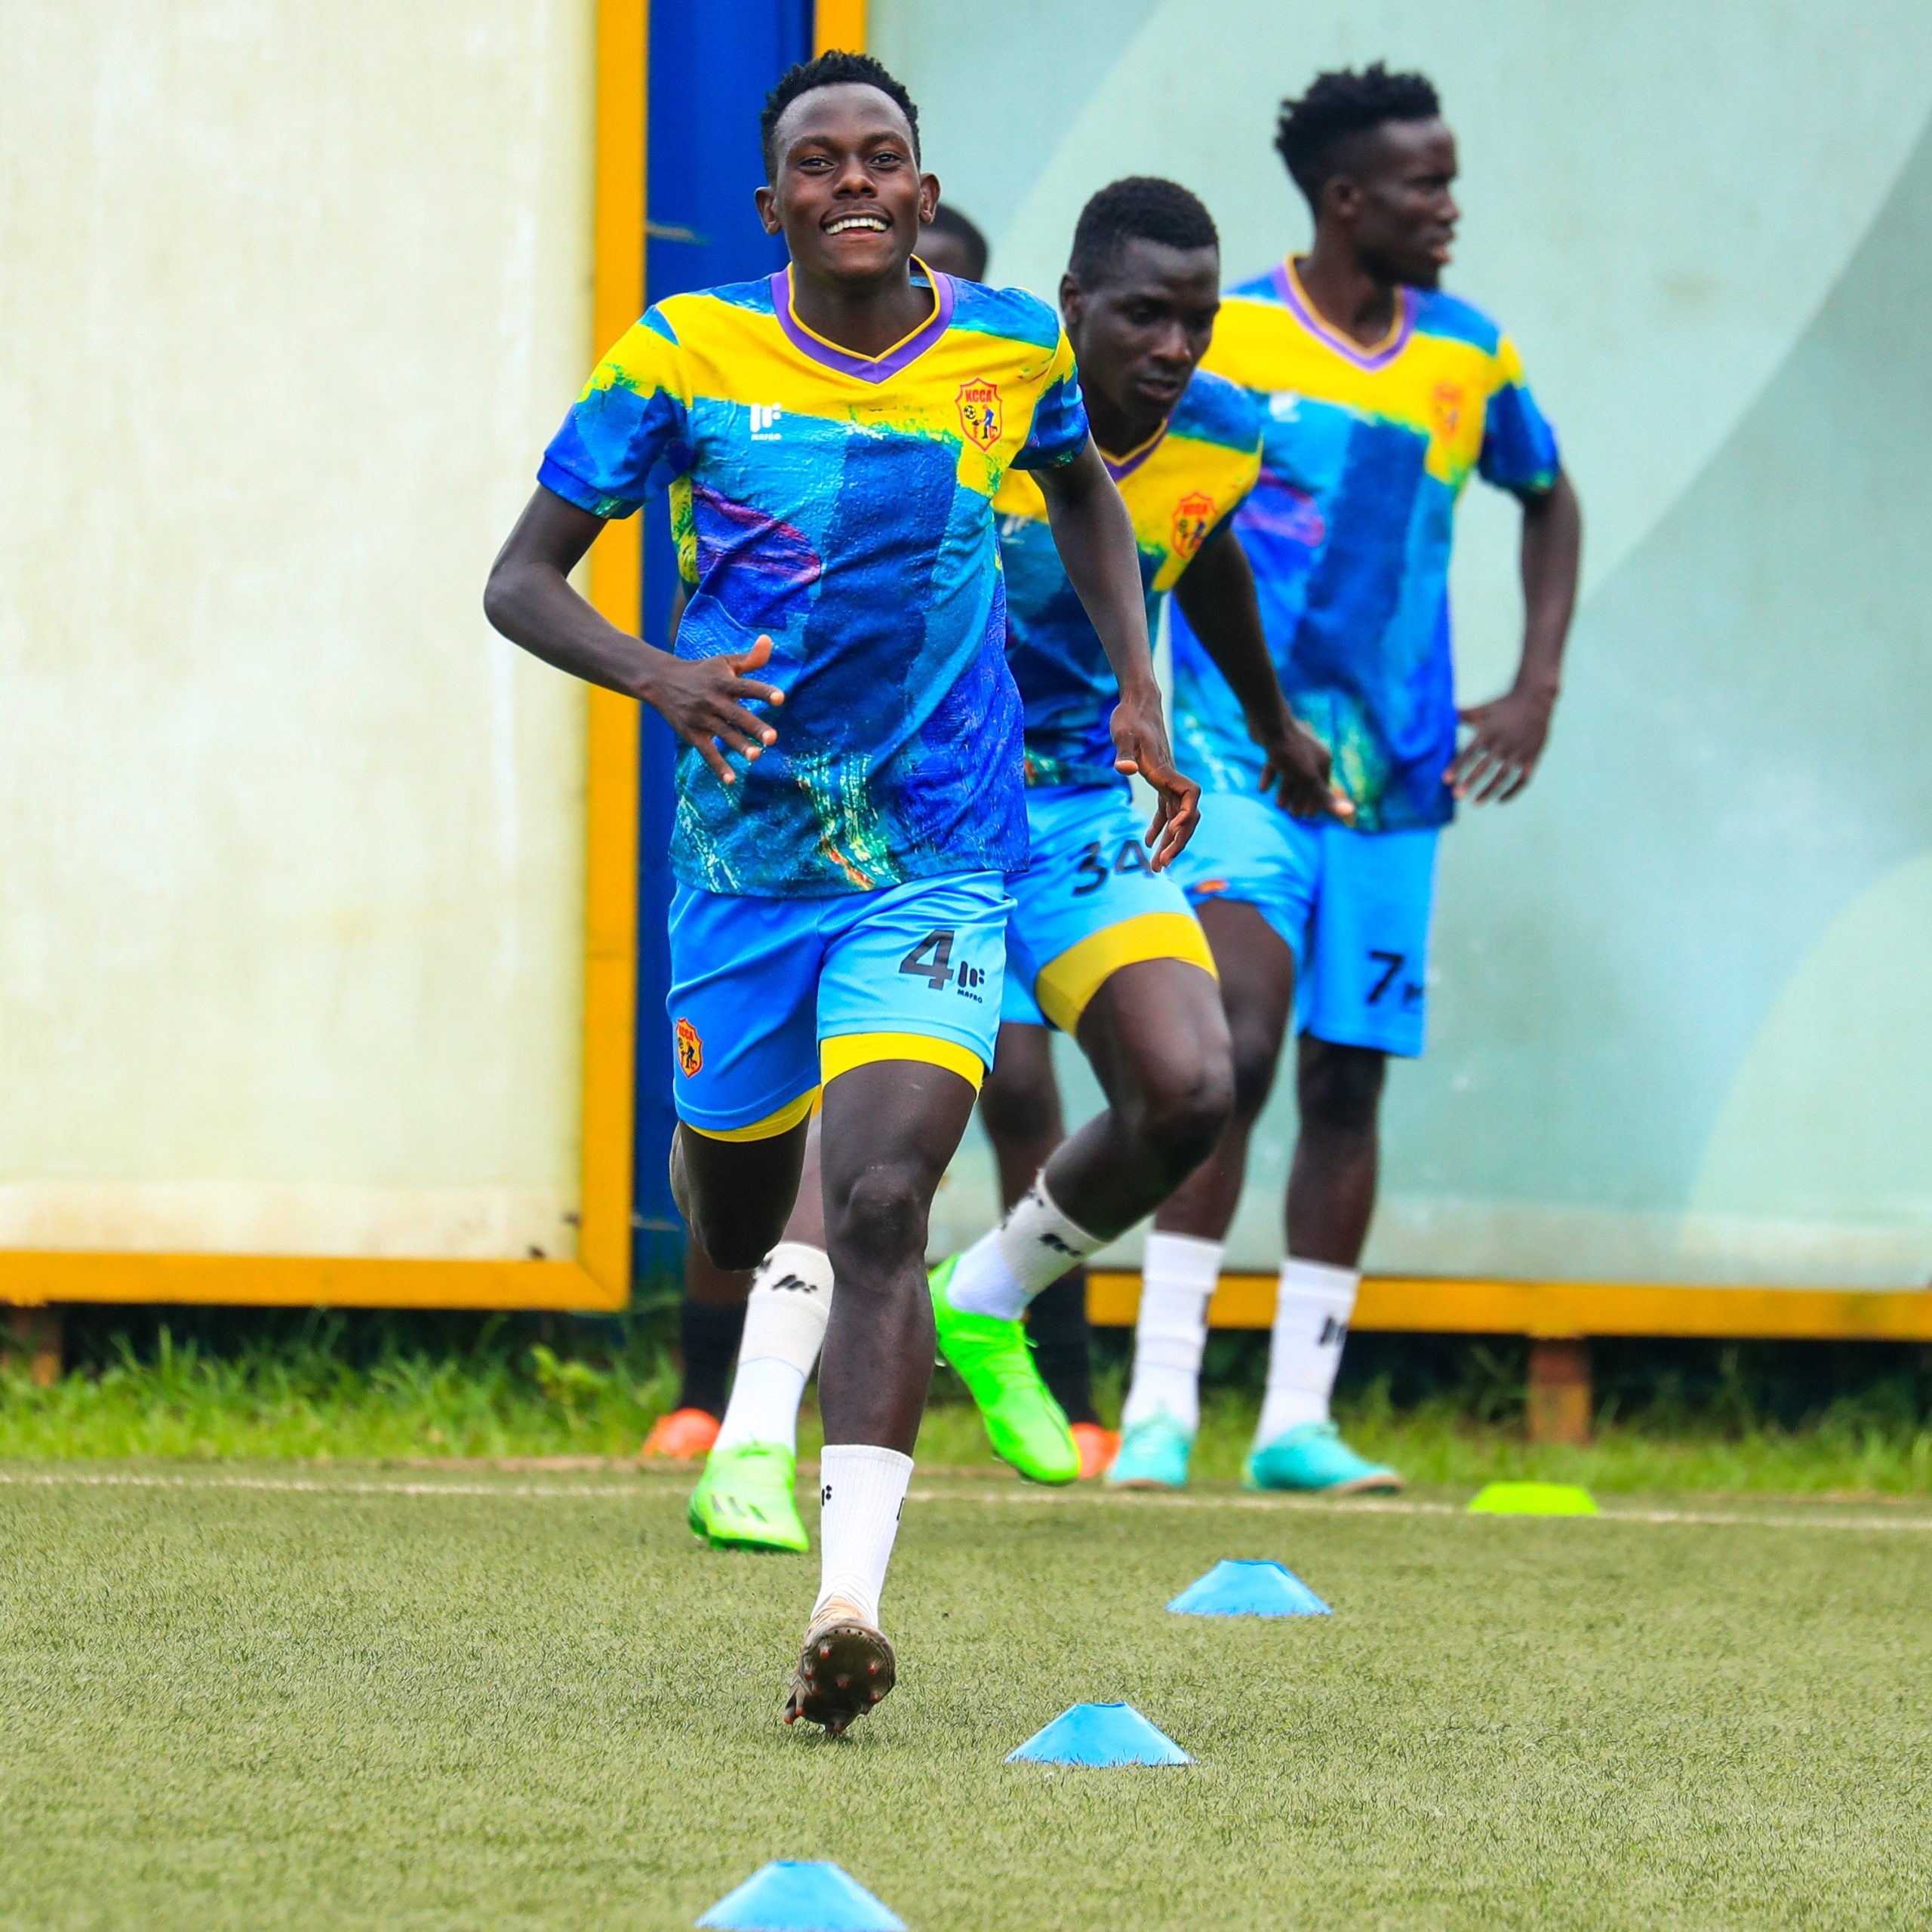 MATCH PREVIEW | KCCA FC visit Busoga in final trip of the season